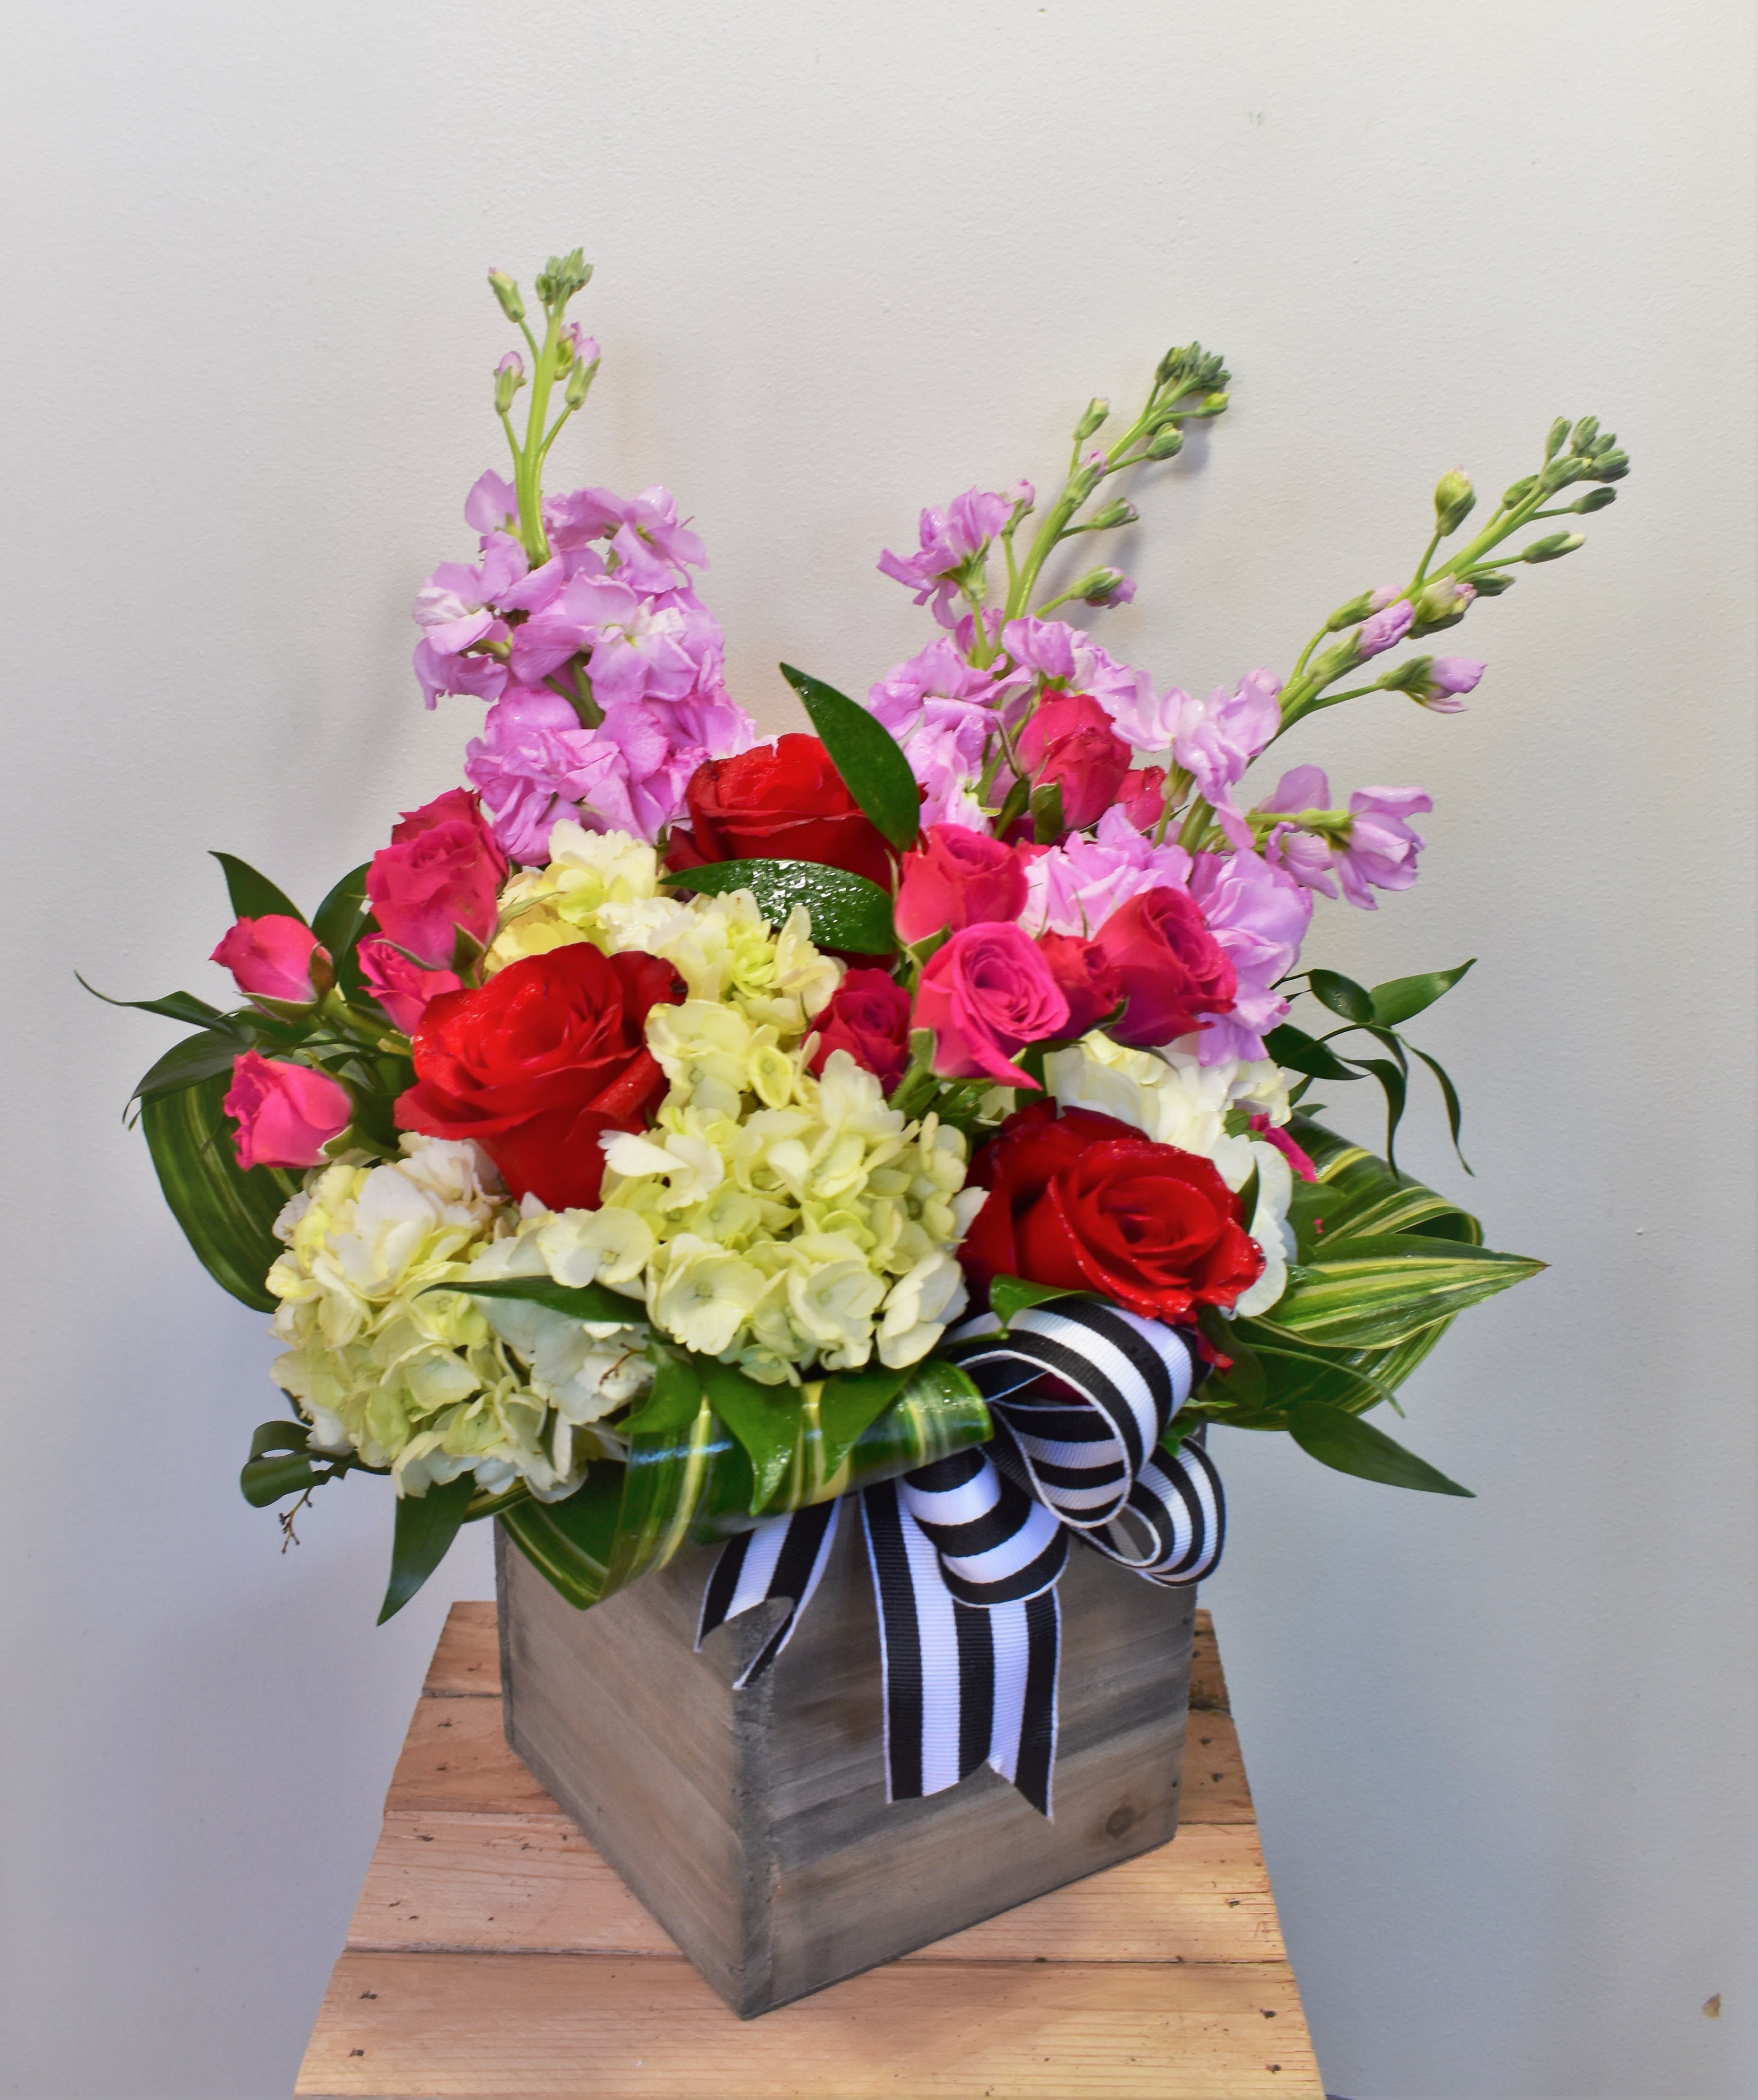 Bundle of Love - A natural wooden box, brimming with colorful blooms! Red roses, pink spray roses, fragrant pink stock and Hydrangea nestle amongst lush foliage for a modern and luxurious look and feel! 